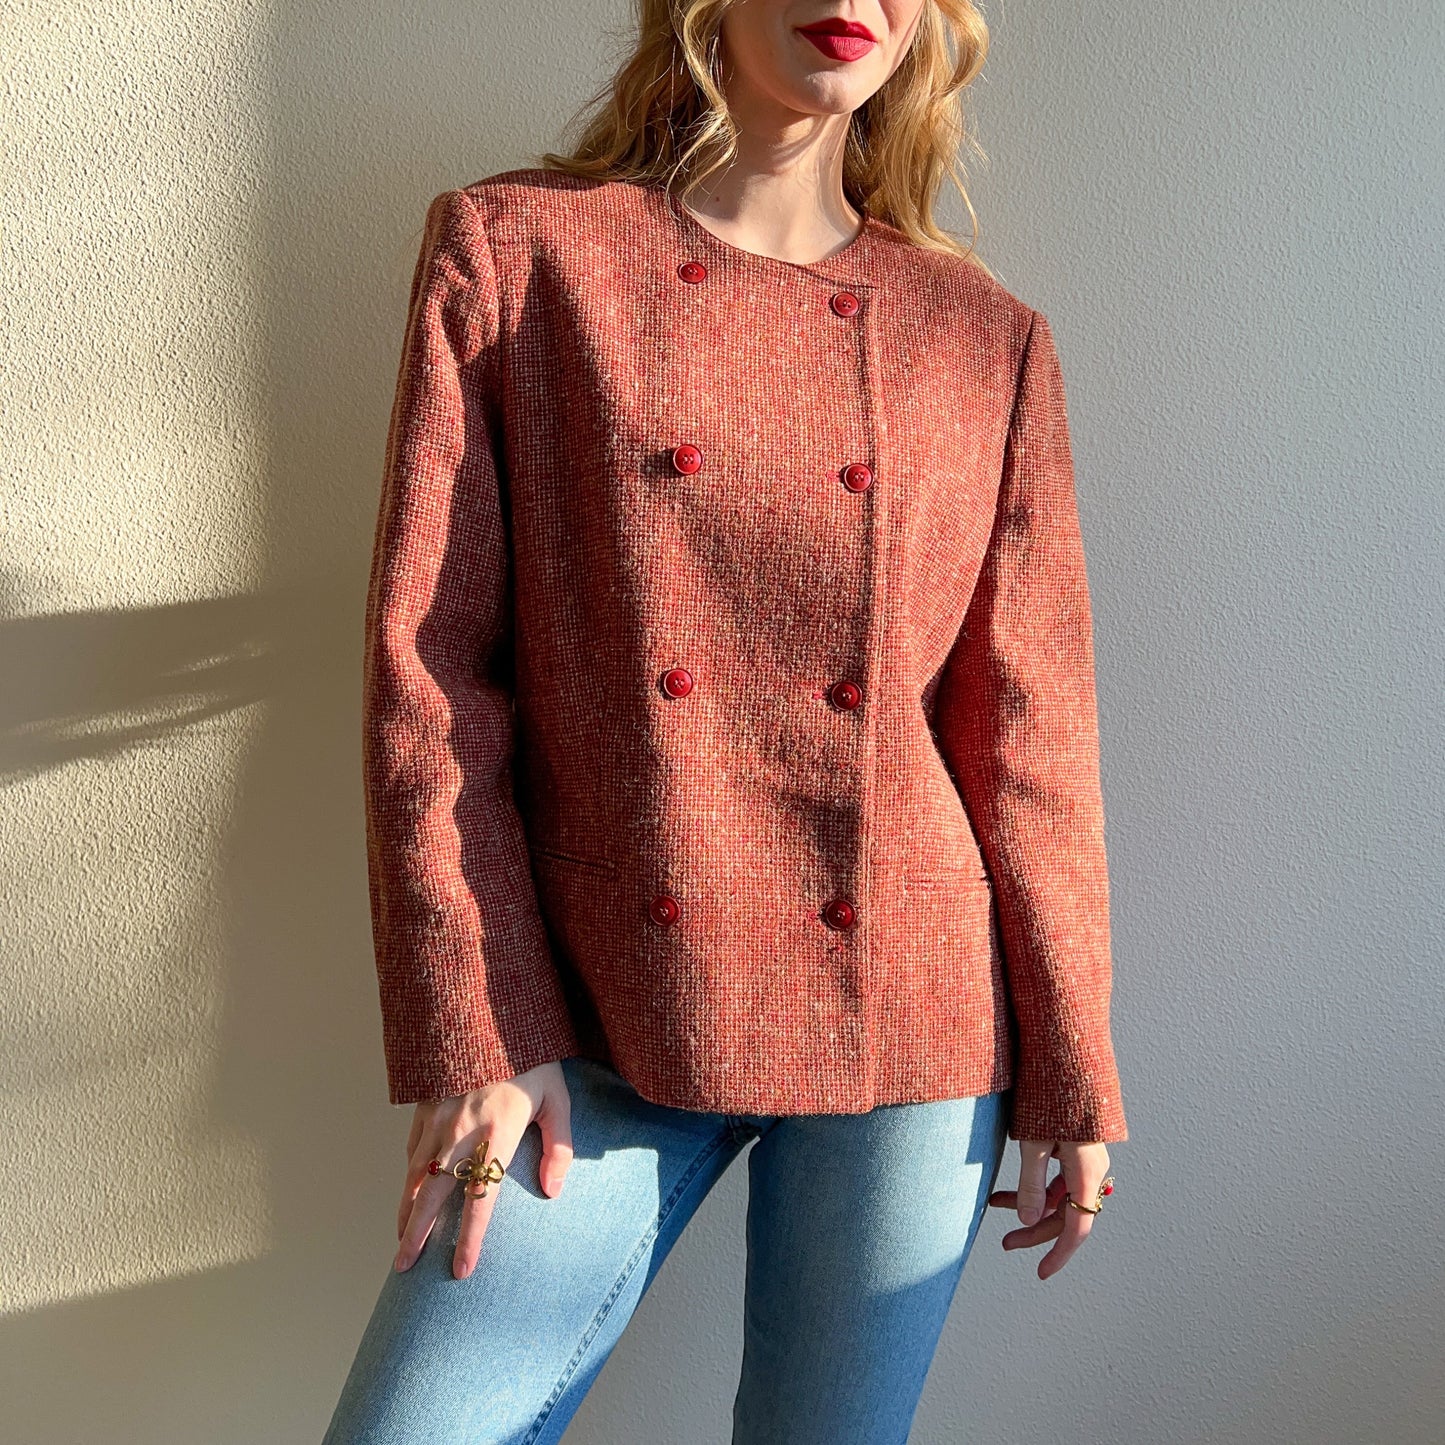 1980s Red Double Breasted Wool Blazer (M/L)